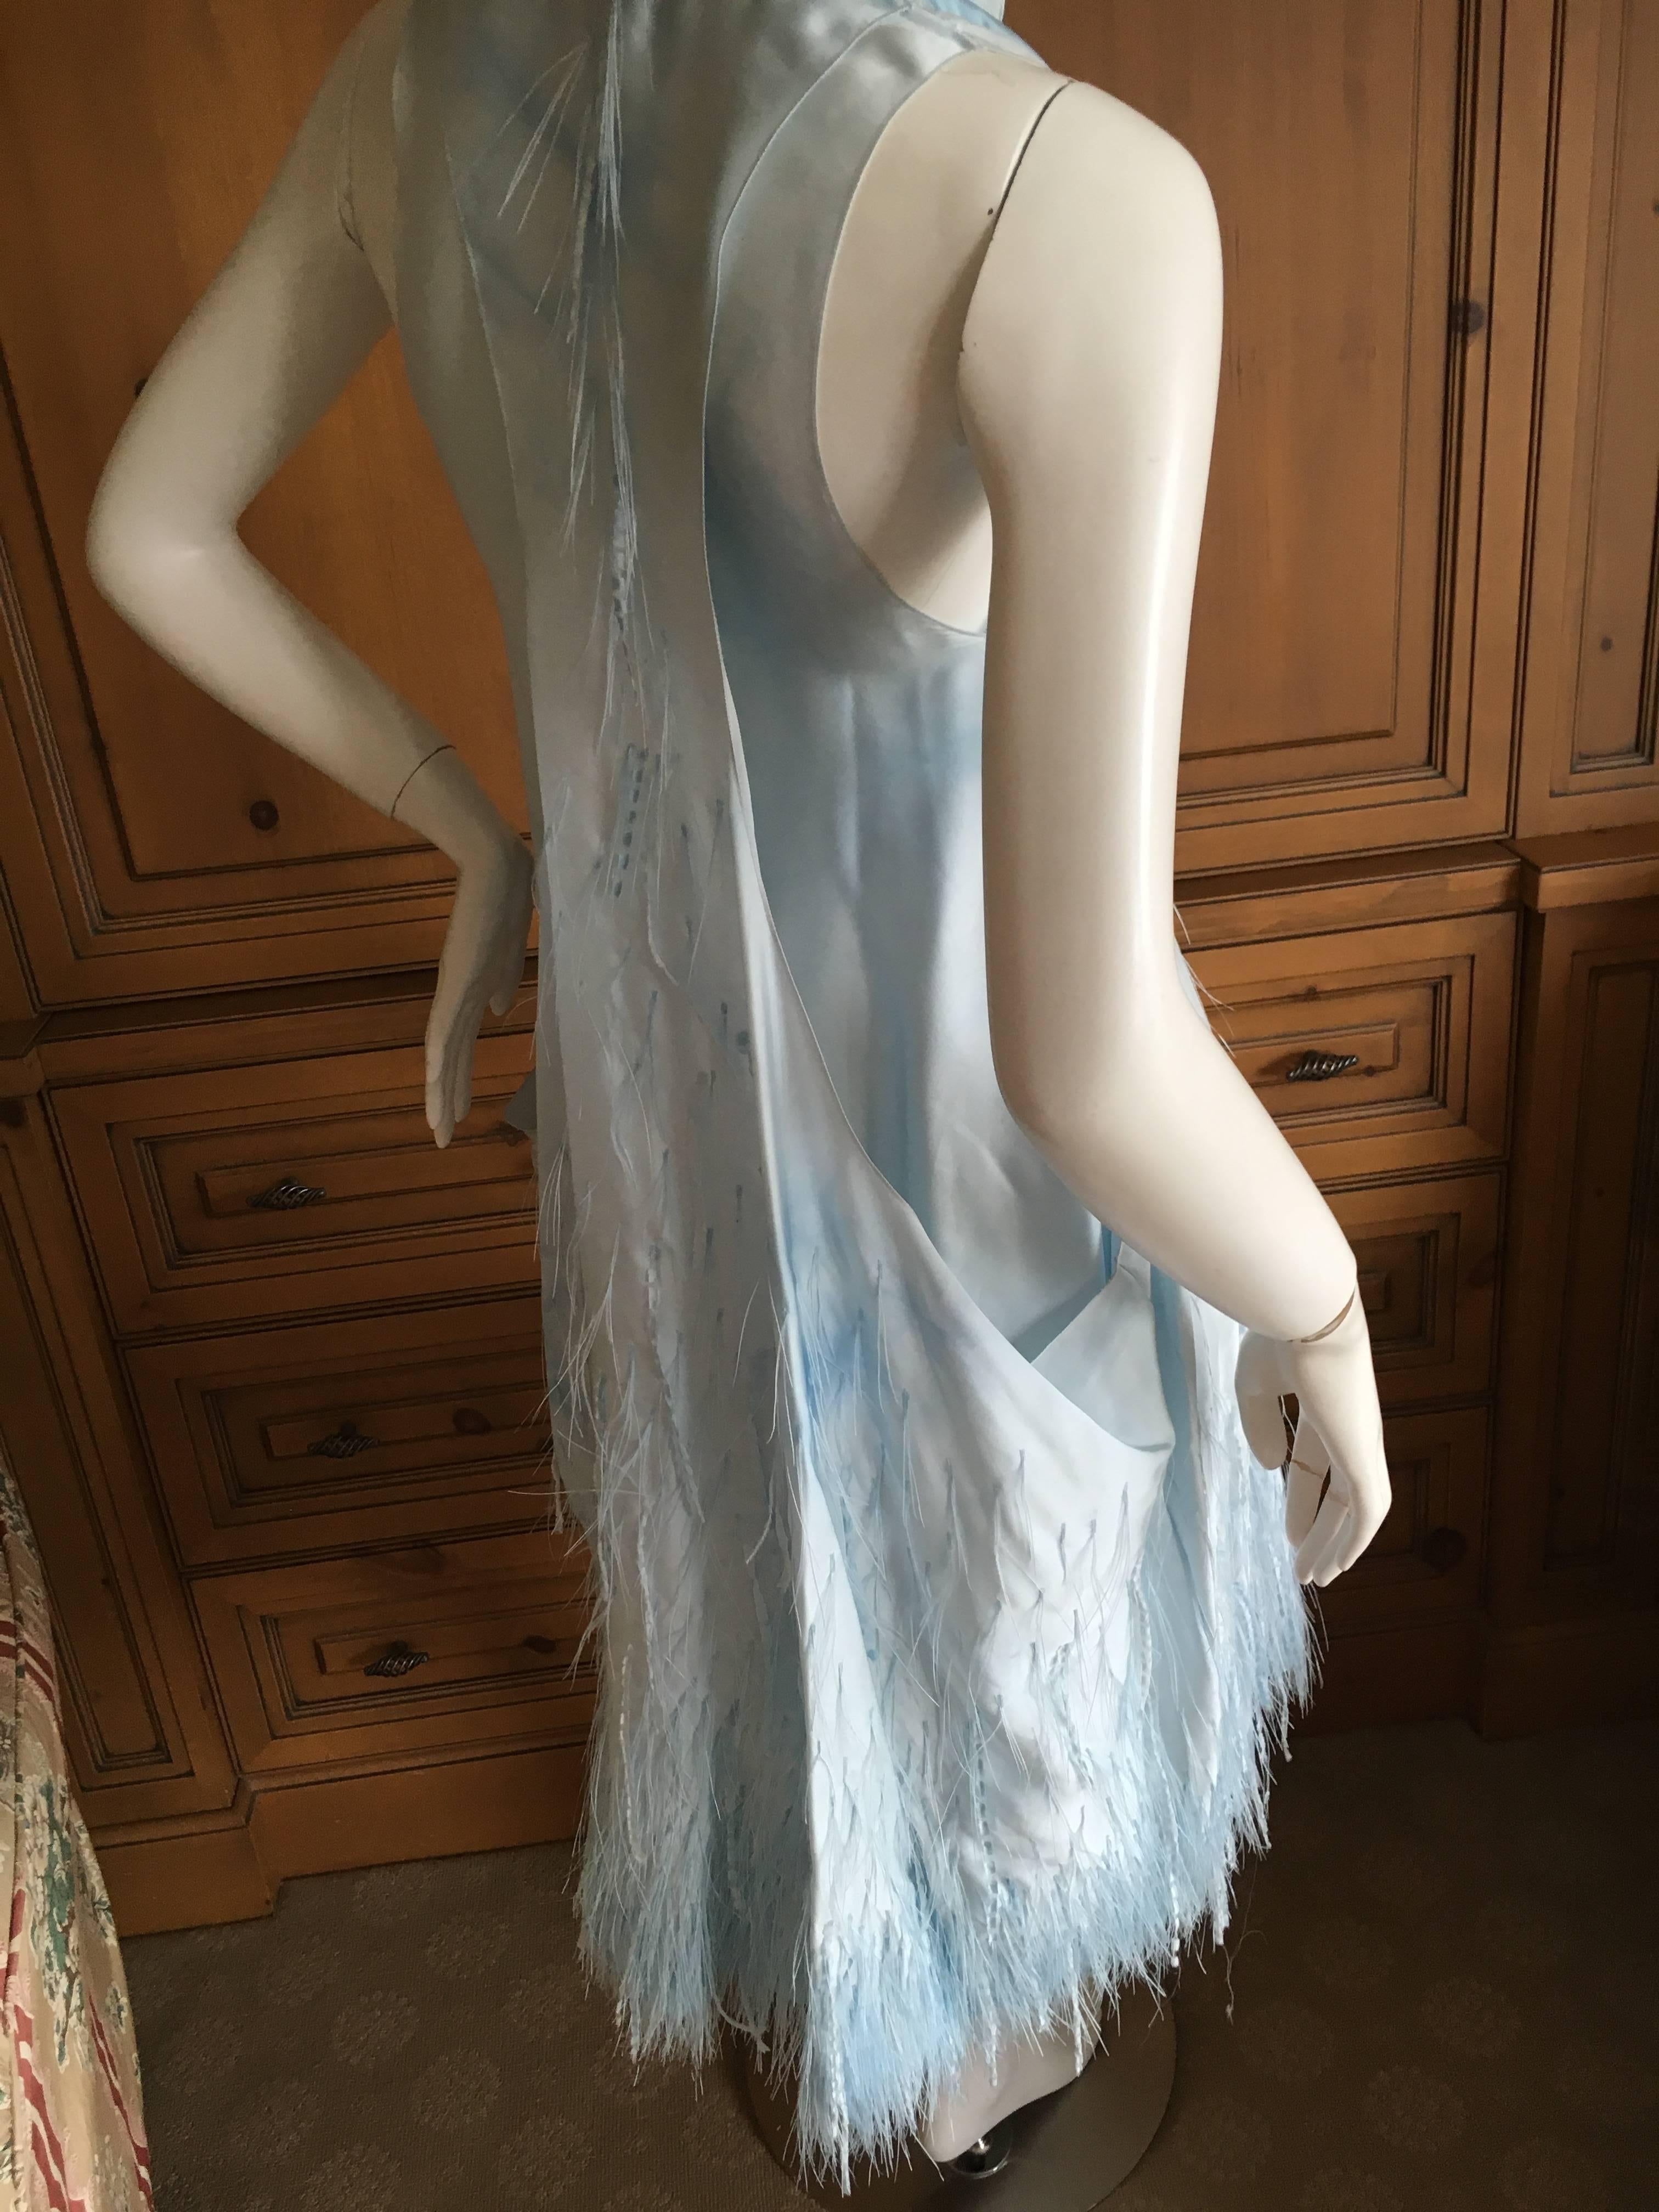 Exquisite Bottega Veneta Pale Turquoise Feathered Silk Dress by Tomas Maier.
Size 38
Bust 38